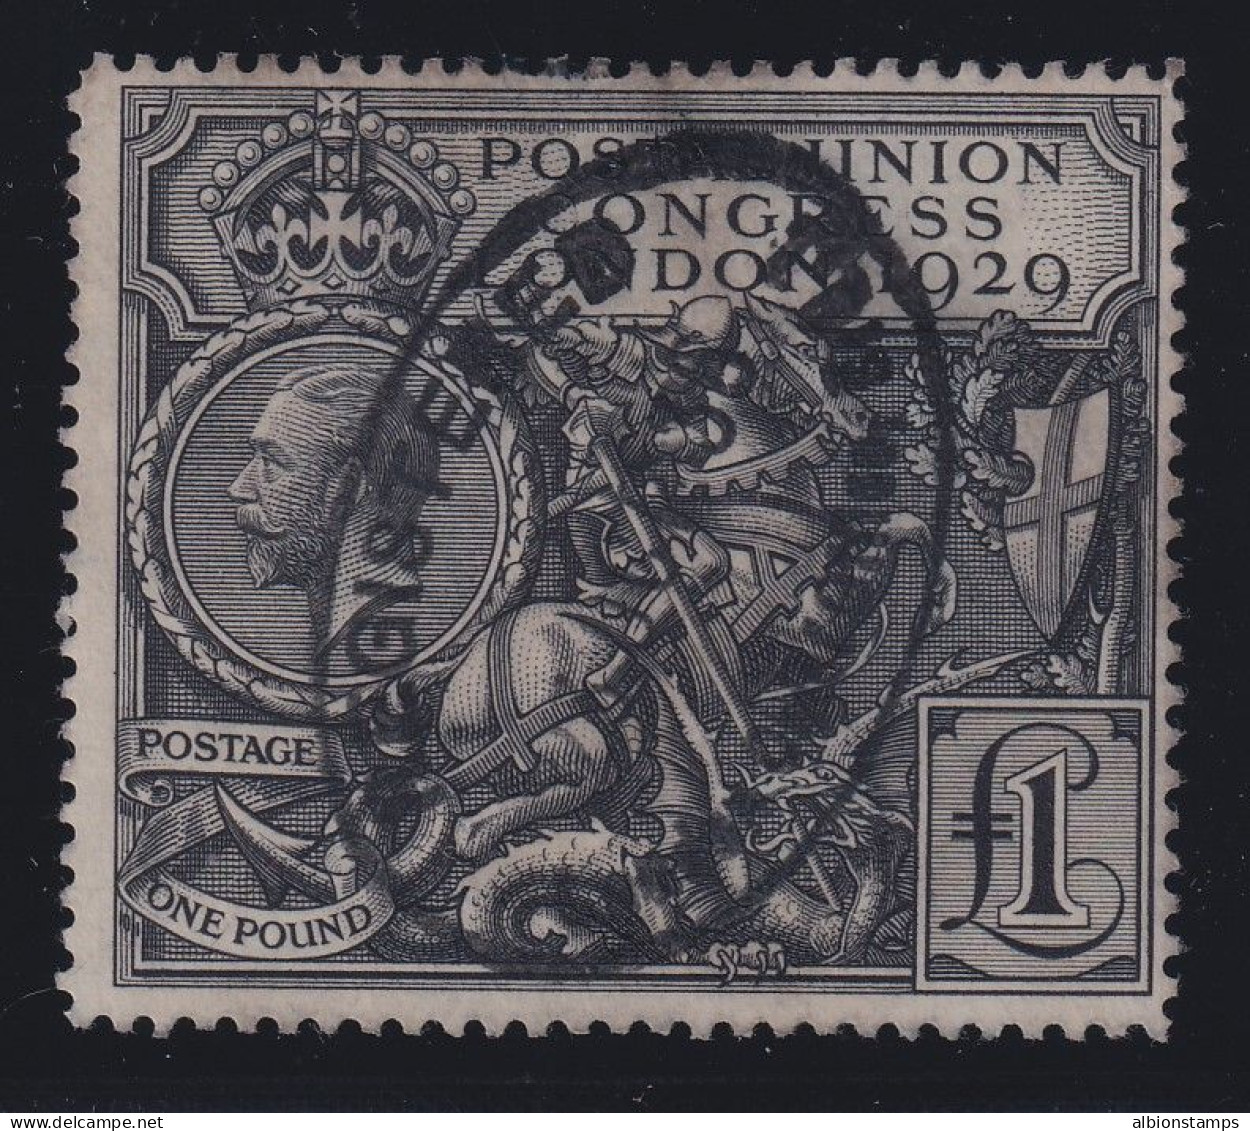 Great Britain, Scott 209 (SG 438), Used, 1936 Registered Cancel - Used Stamps